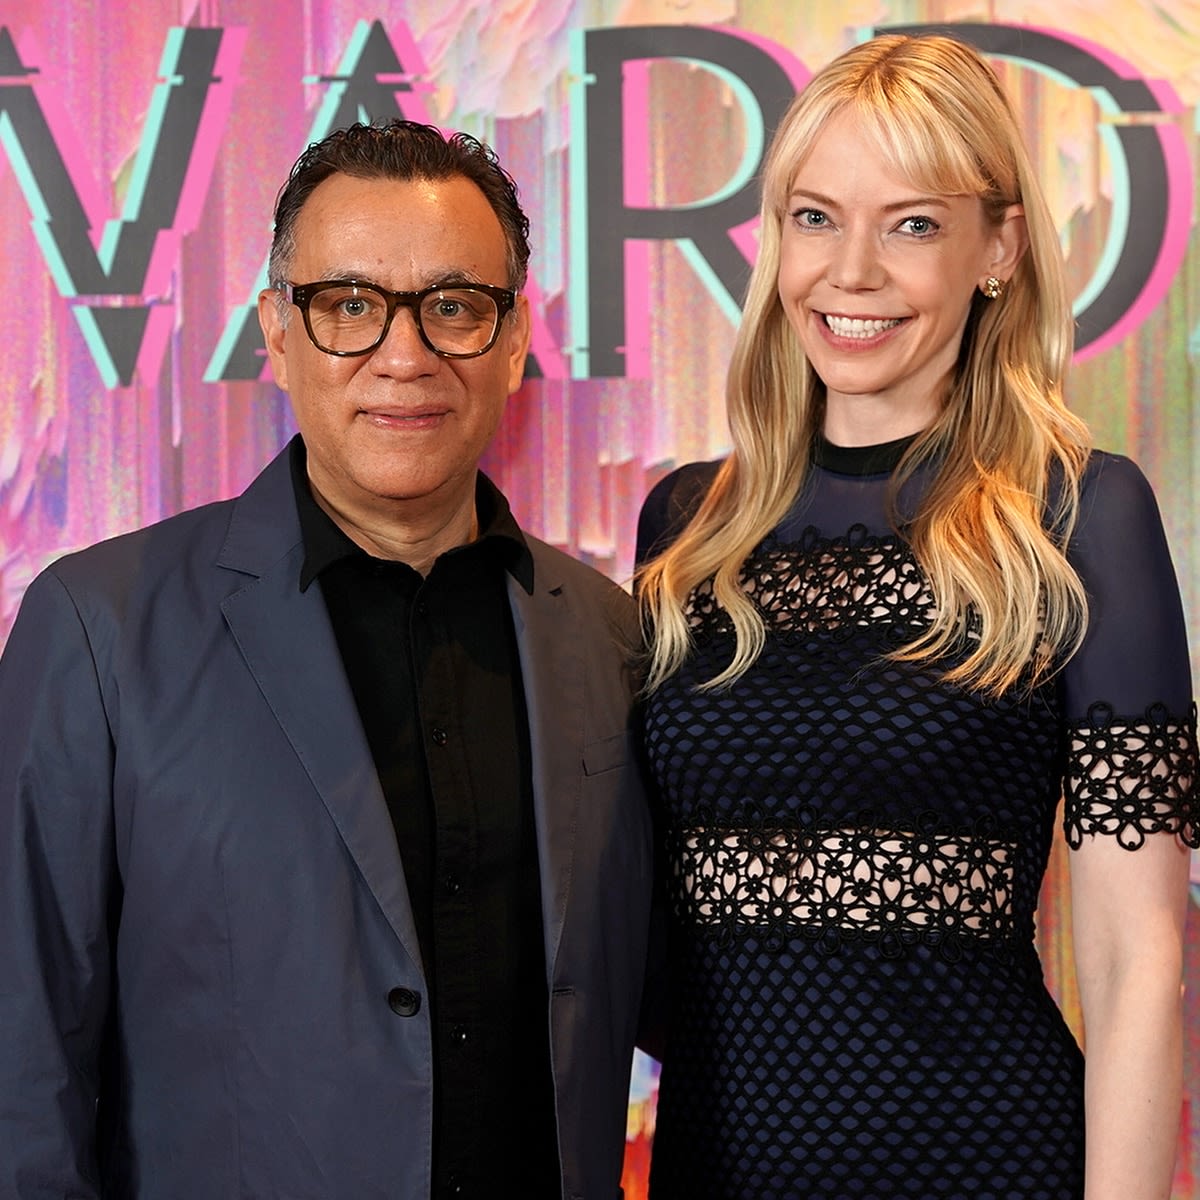 Wednesday ’s Riki Lindhome Reveals She & Fred Armisen Married in 2022